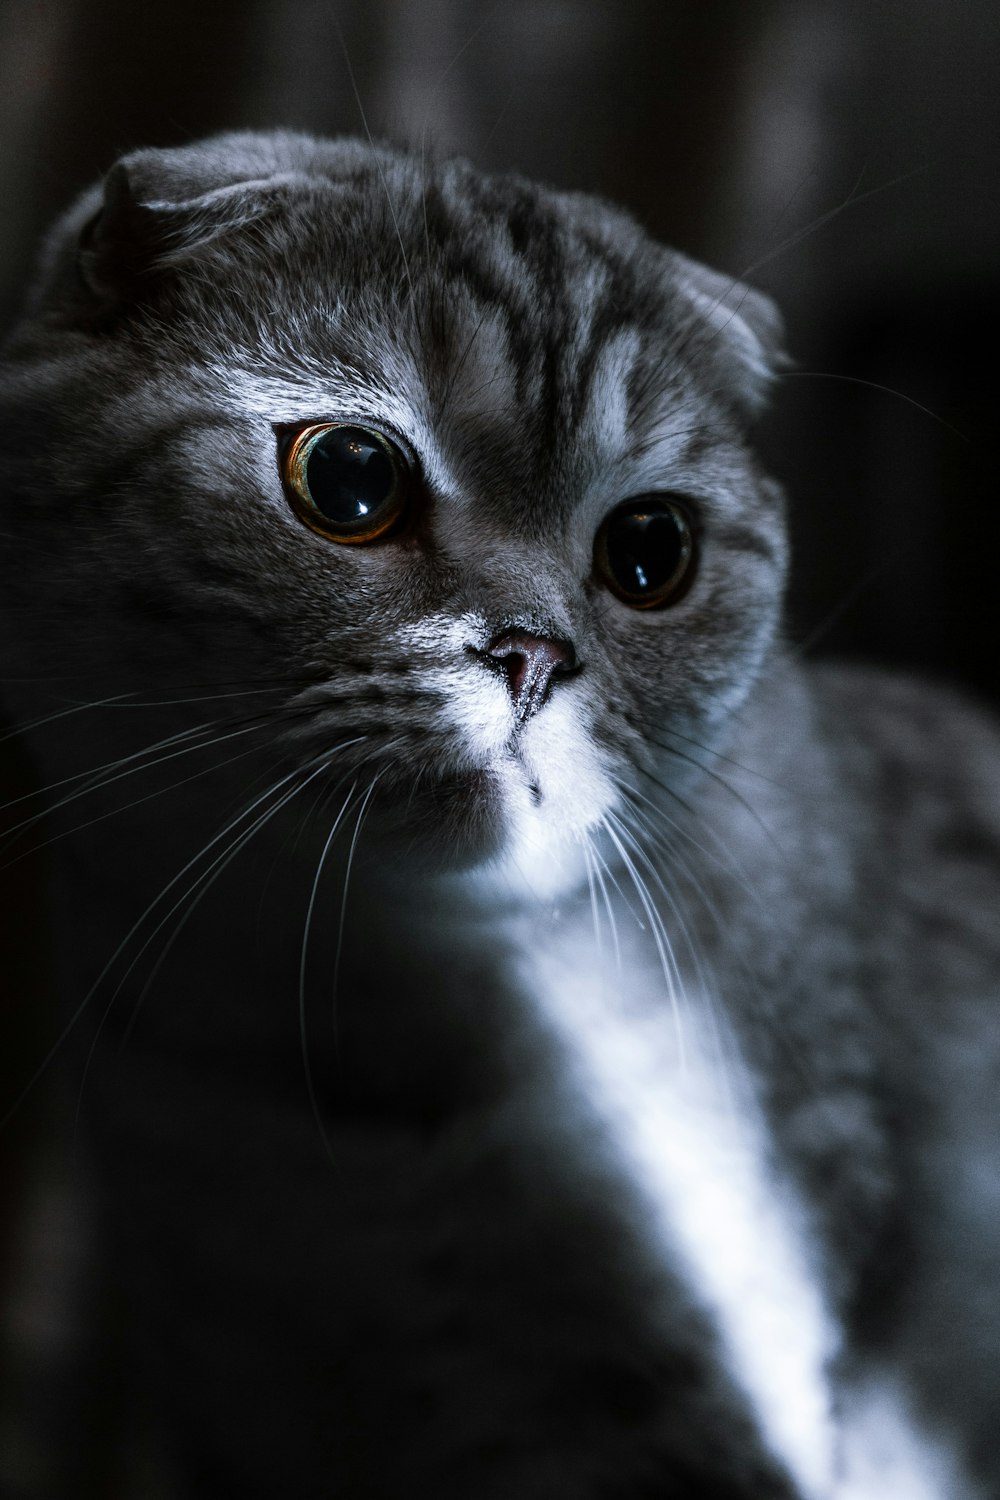 grey and black cat in close up photography